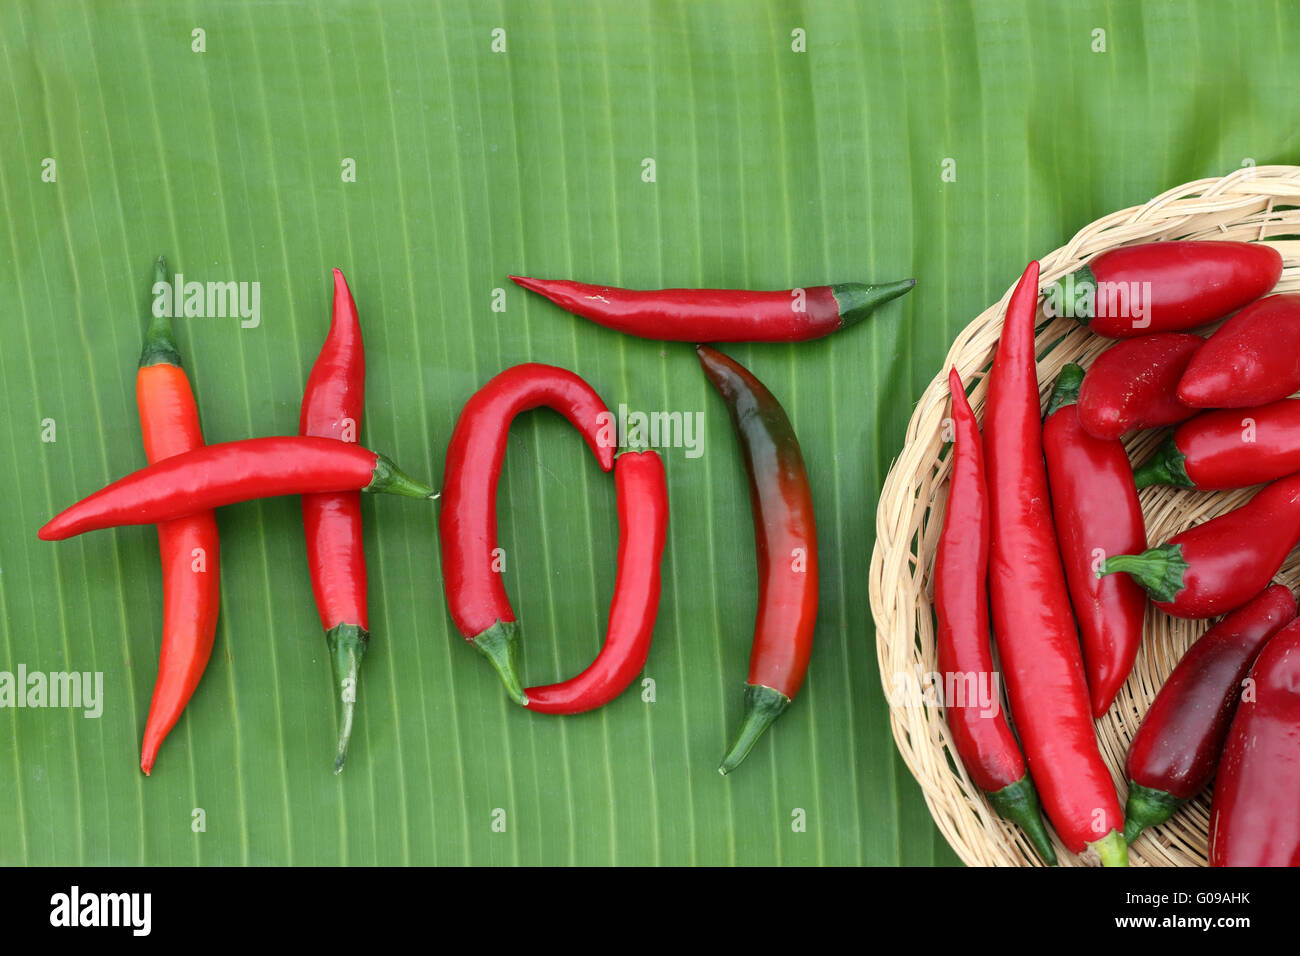 Freshly picked home grown long hot red chillies on banana leaf Stock Photo